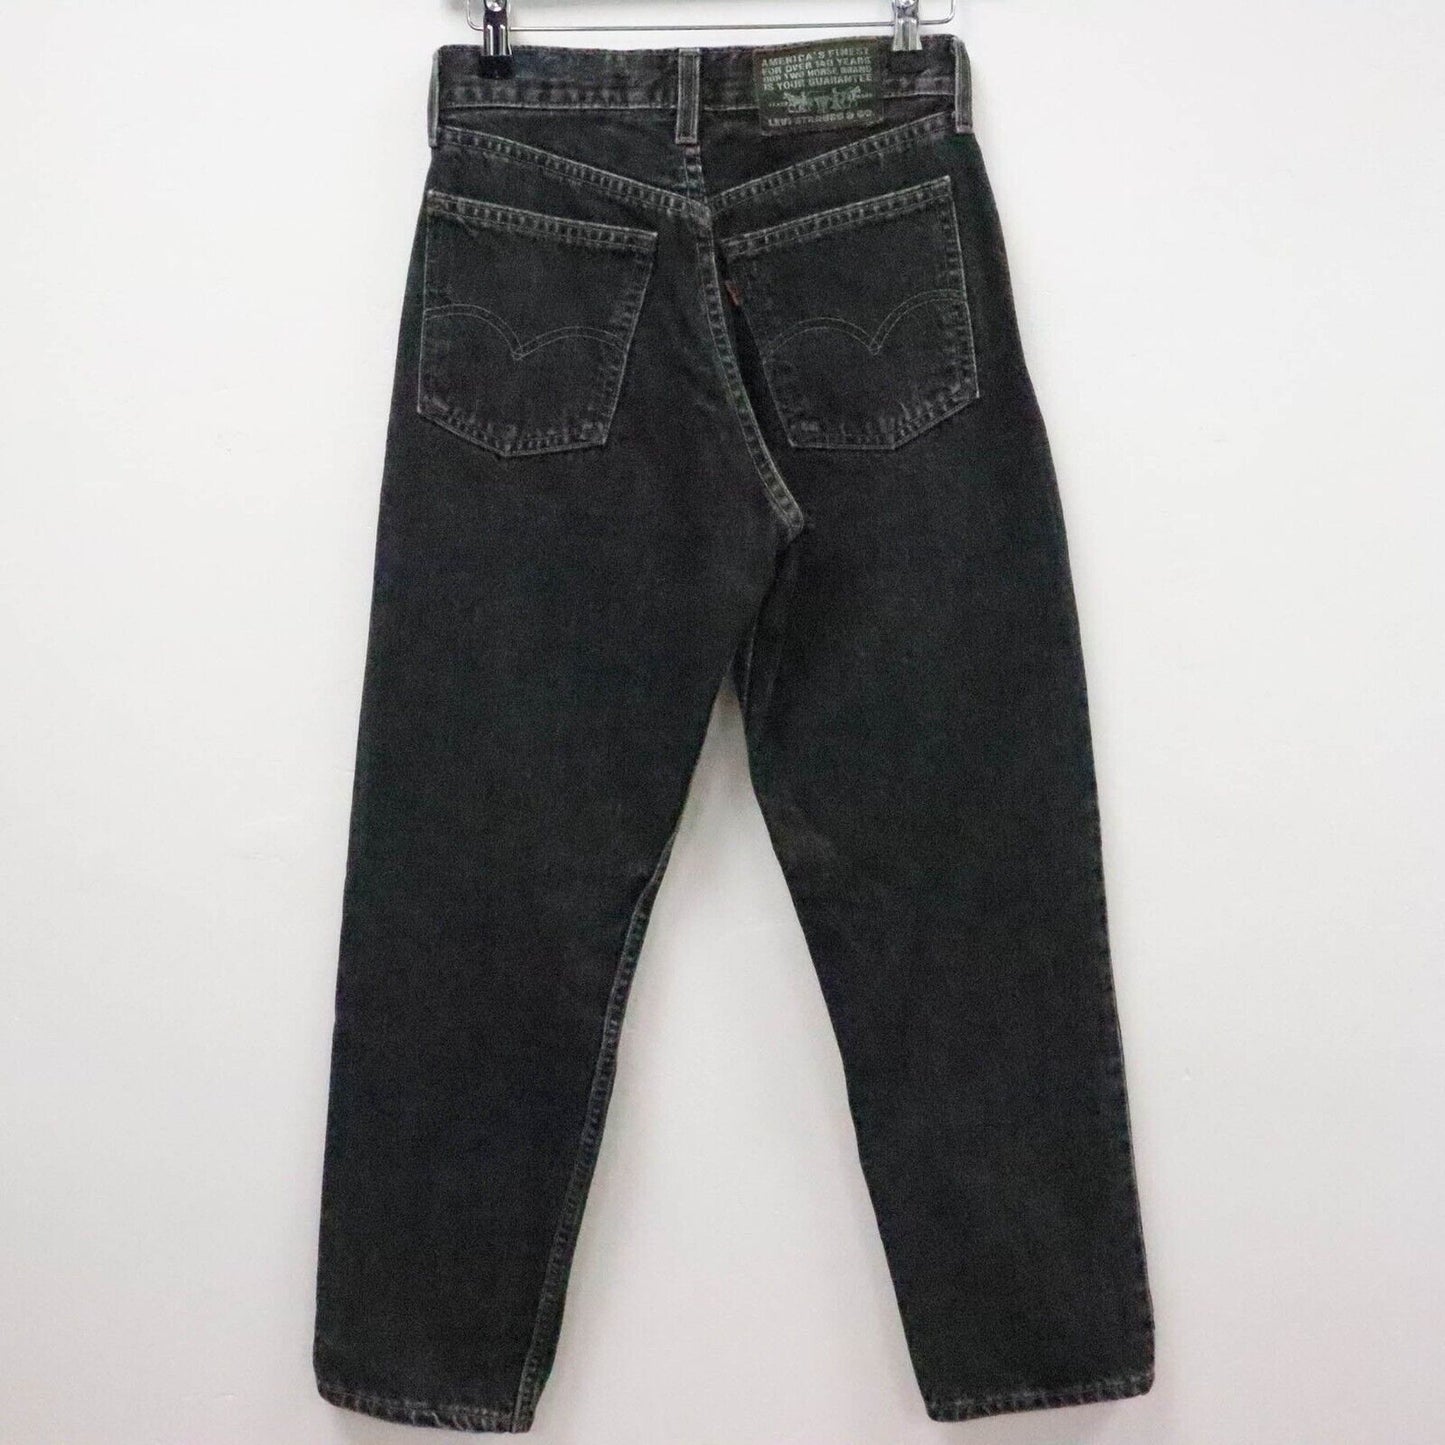 90s Levi’s Mom Fit Jeans Size UK 8 W26 L28